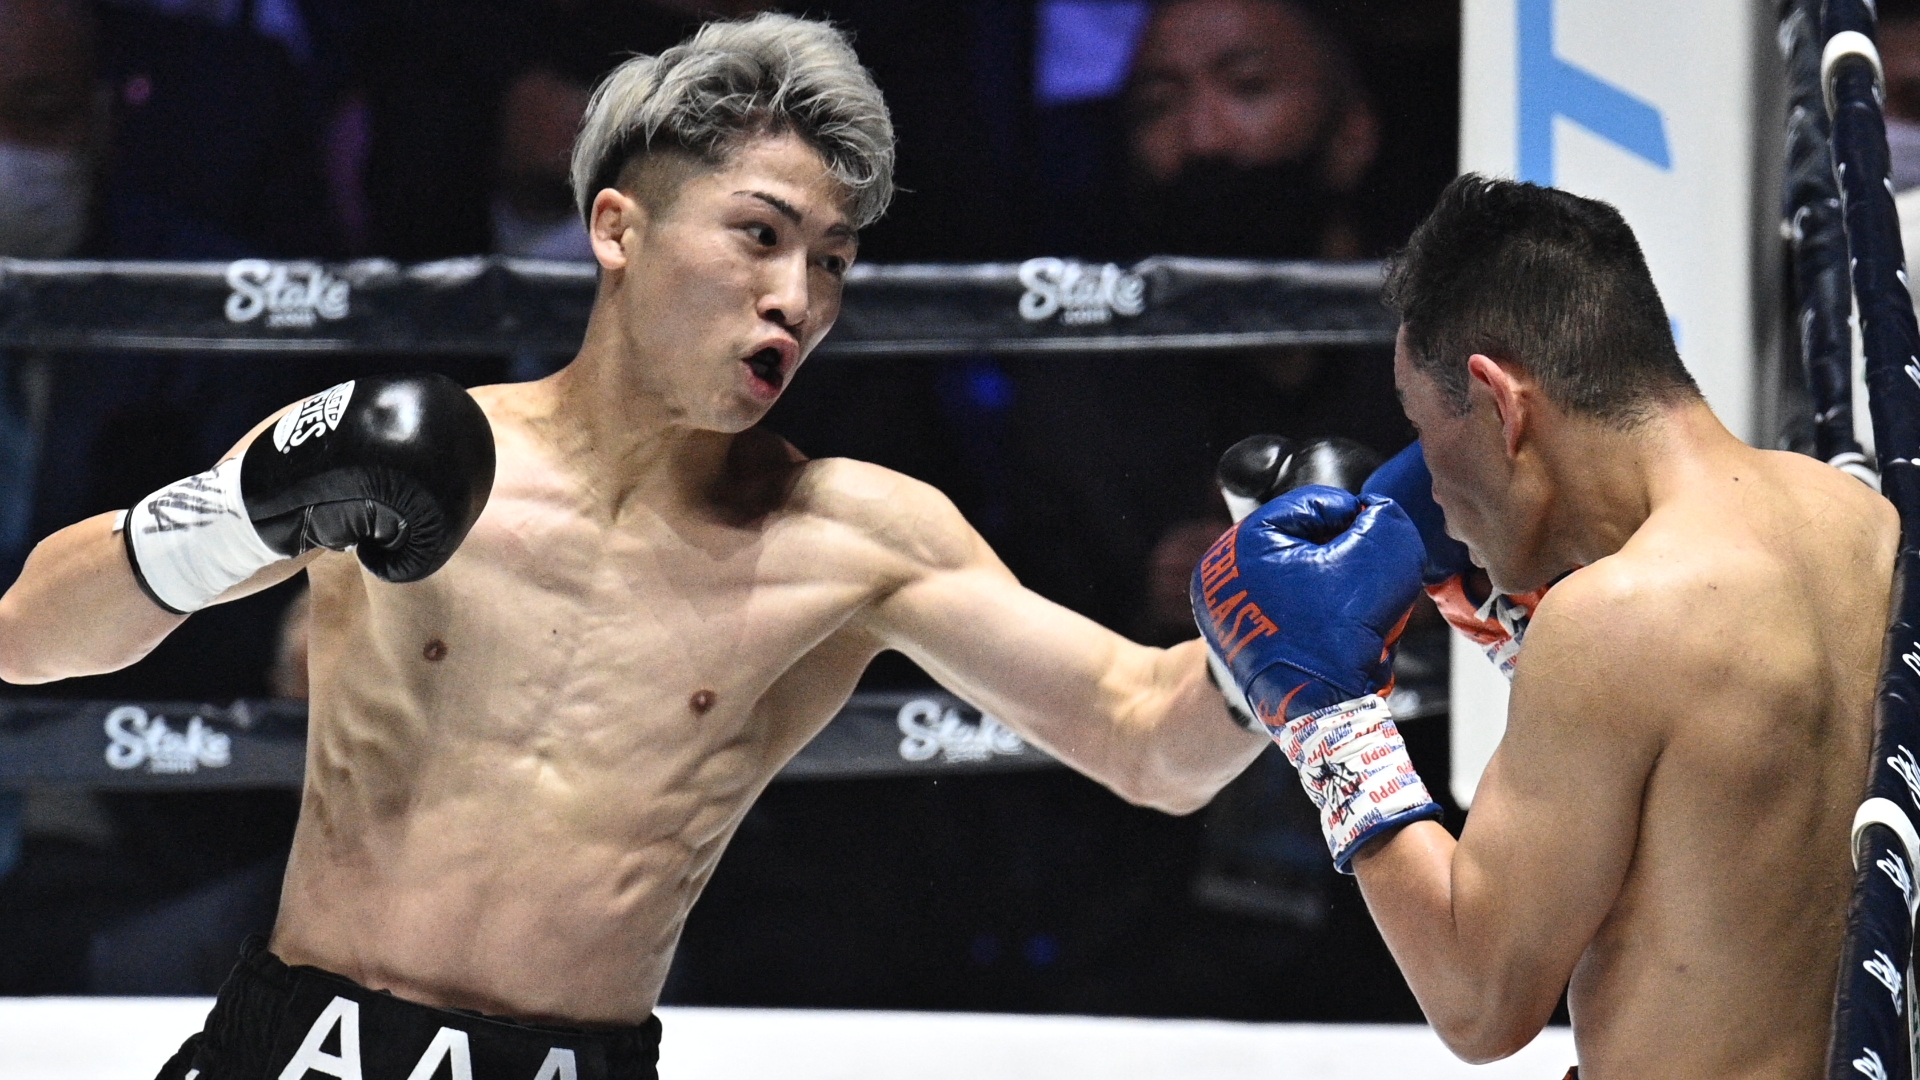 Naoya Inoue KOs Nonito Donaire in Round 2 of rematch - Stream the Video